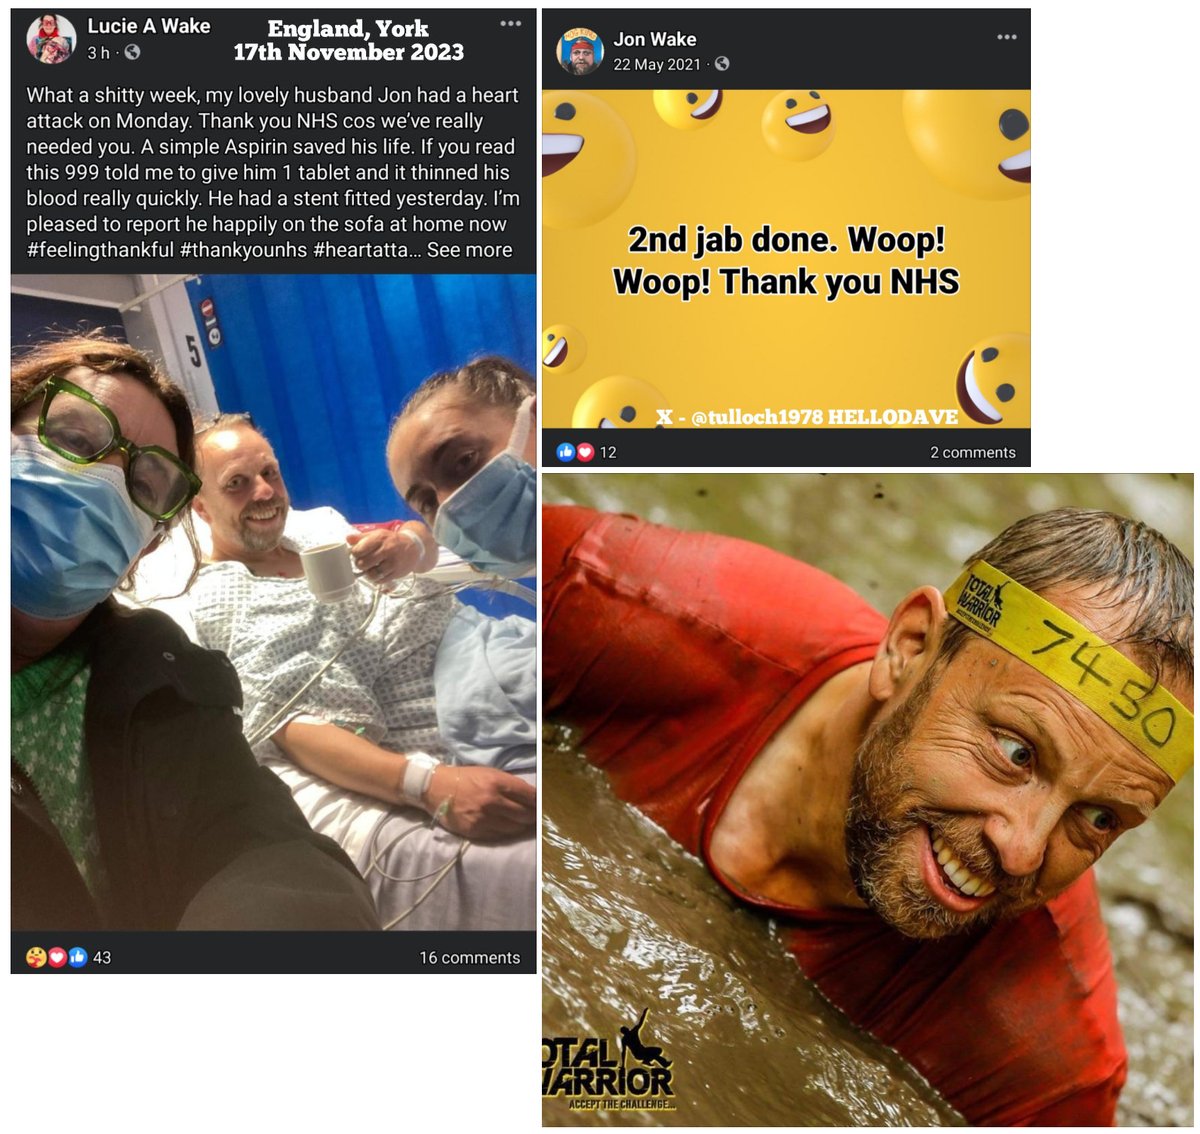 York, England - Jon Wake had a heart attack in November 2023.

He's done the Total Warrior, The Great Northern Mud Run (a race made up of 25 punishing obstacles, 10 tonnes of ice and 100 tonnes of mud)

He was extremely happy to get his heart damaging COVID-19 mRNA Vaccines:

May